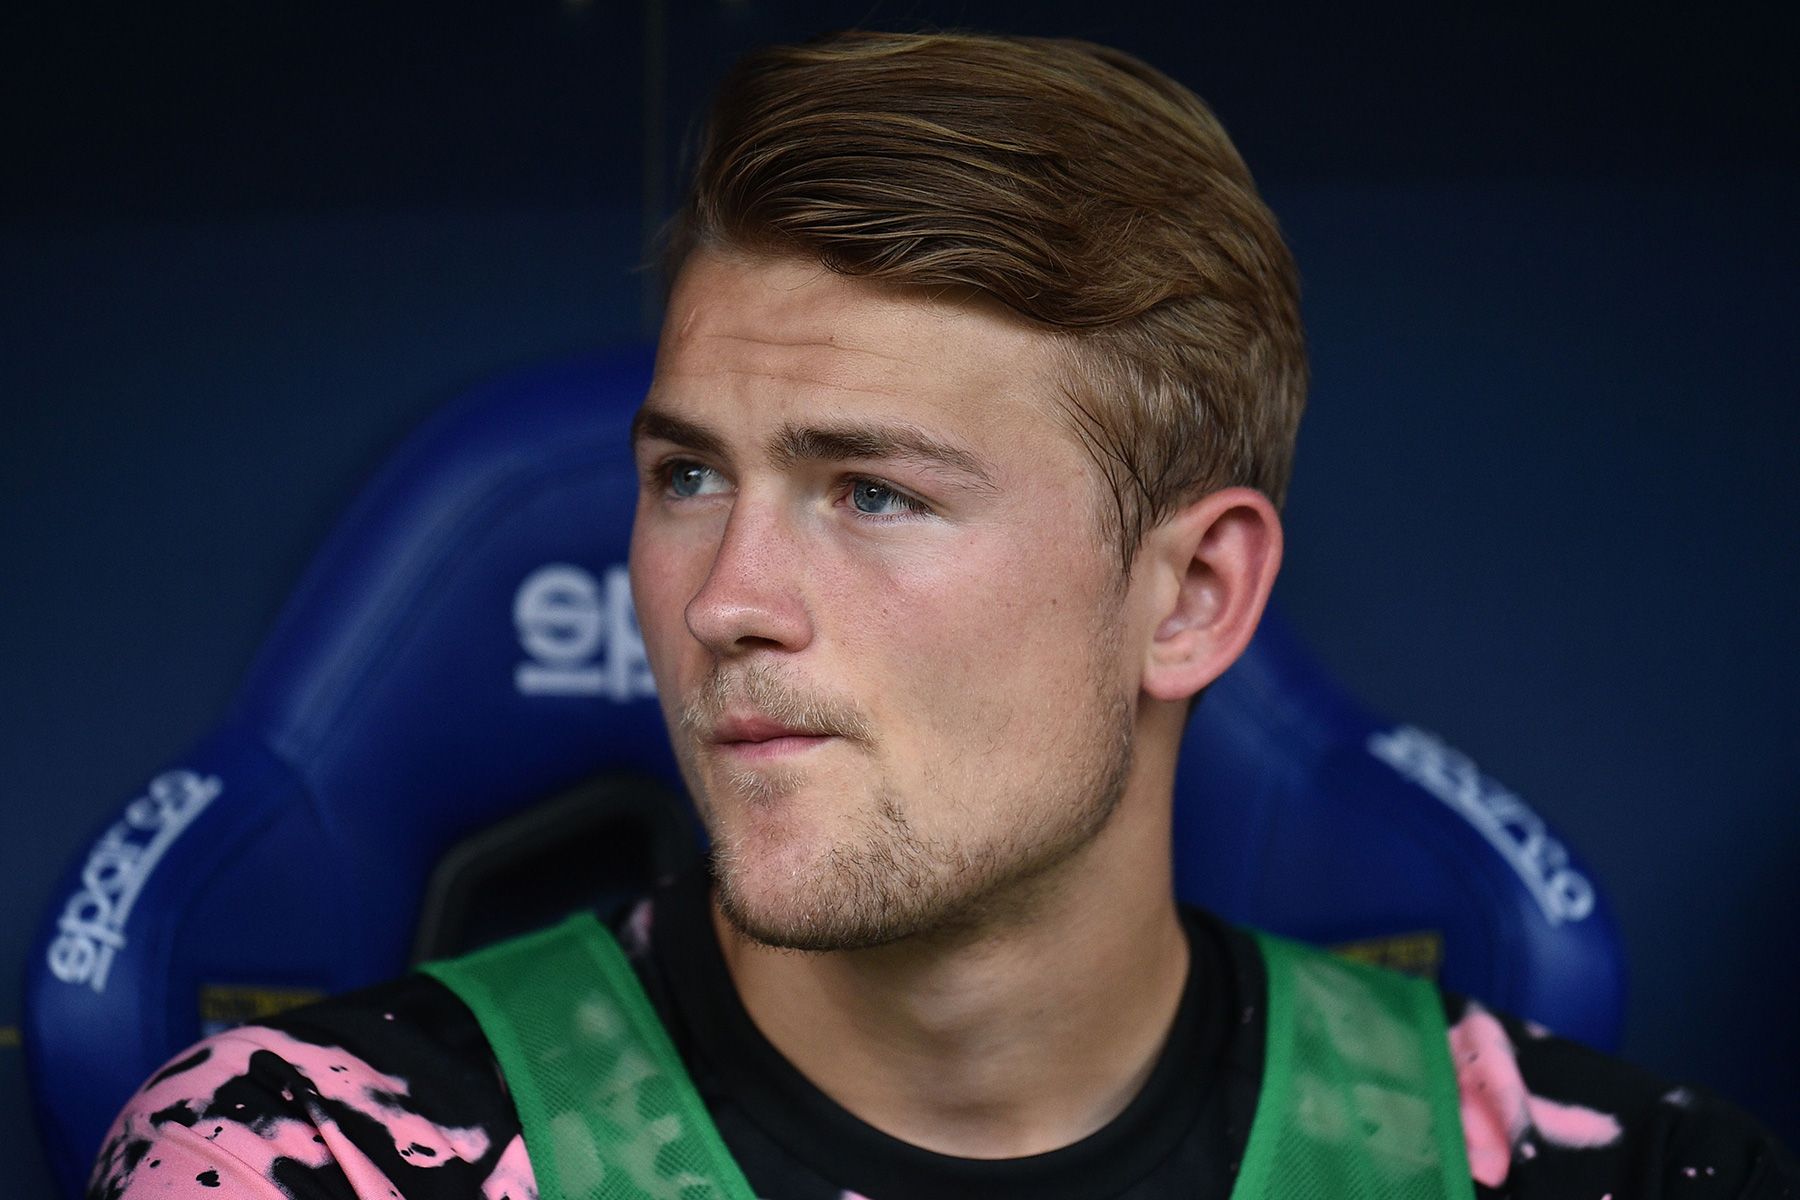 De Ligt in the bench of the Juventus